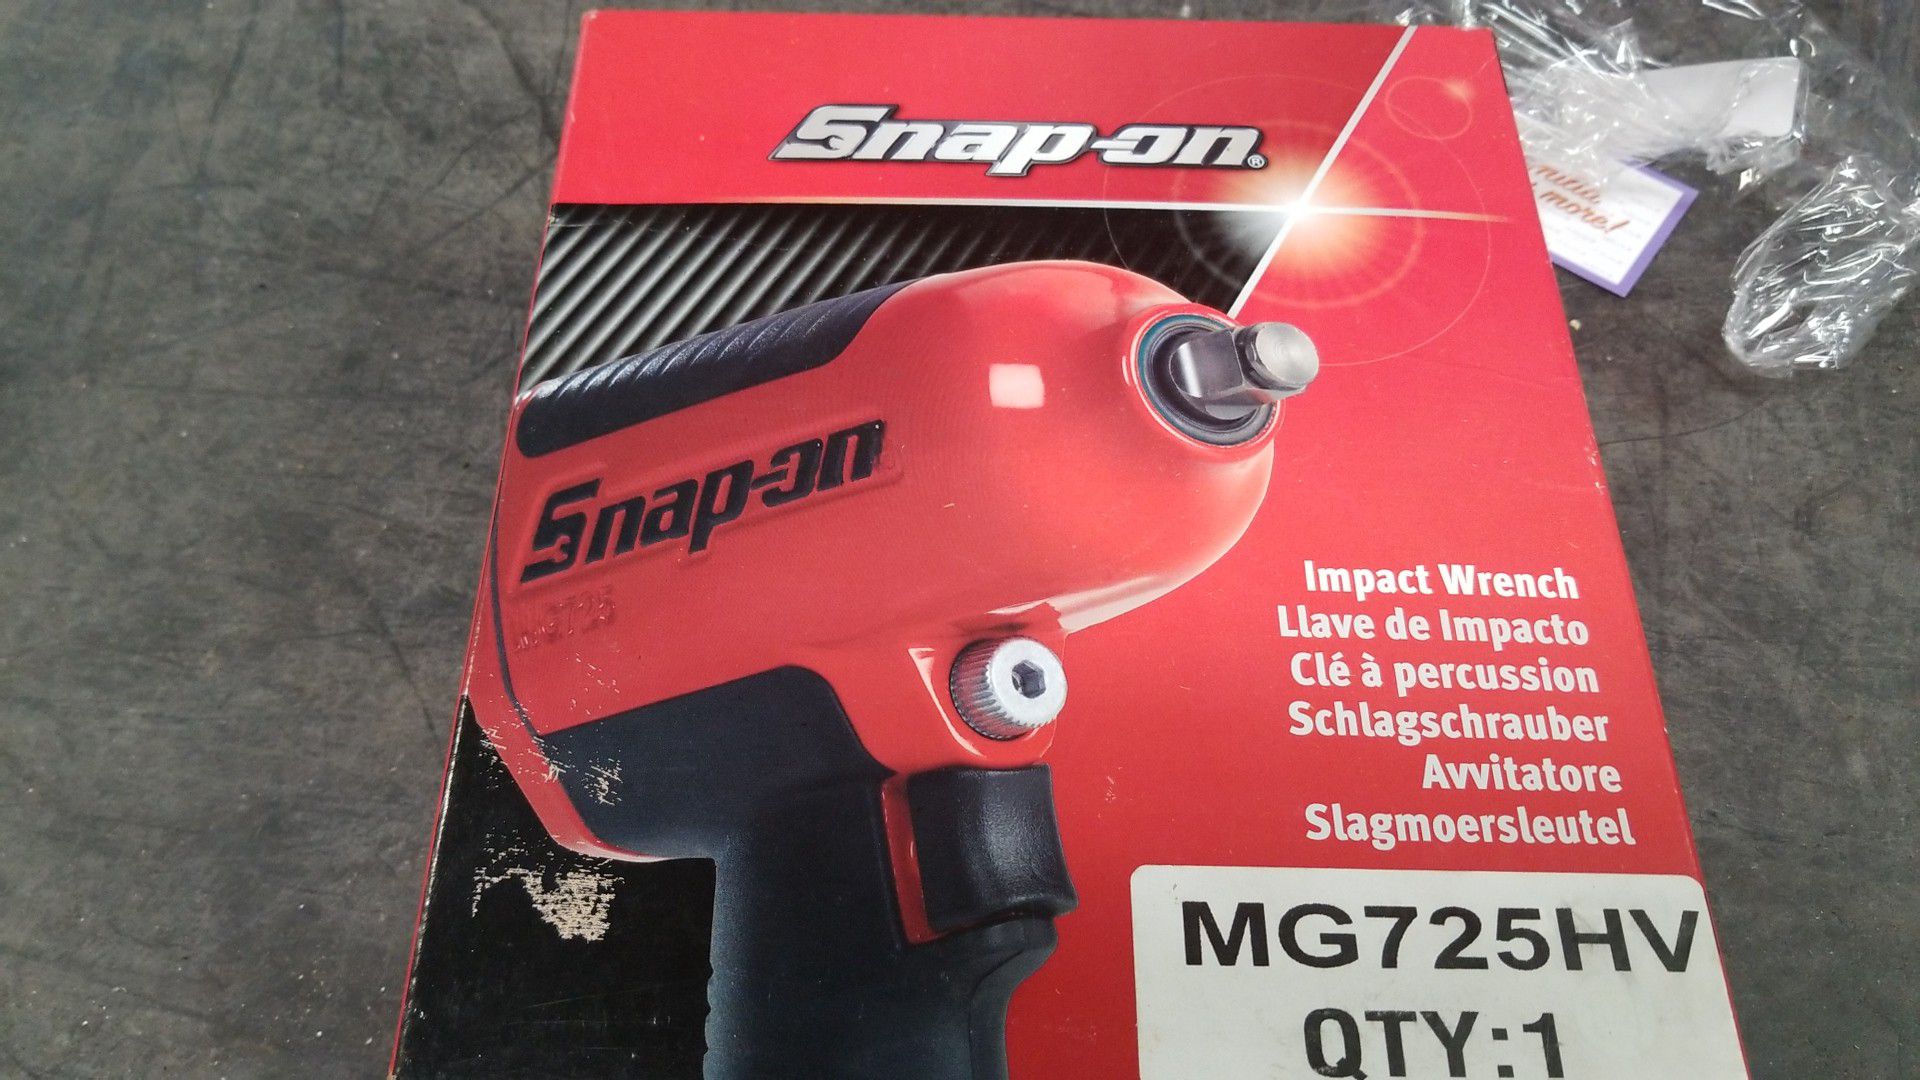 Snap on Impact Wrench